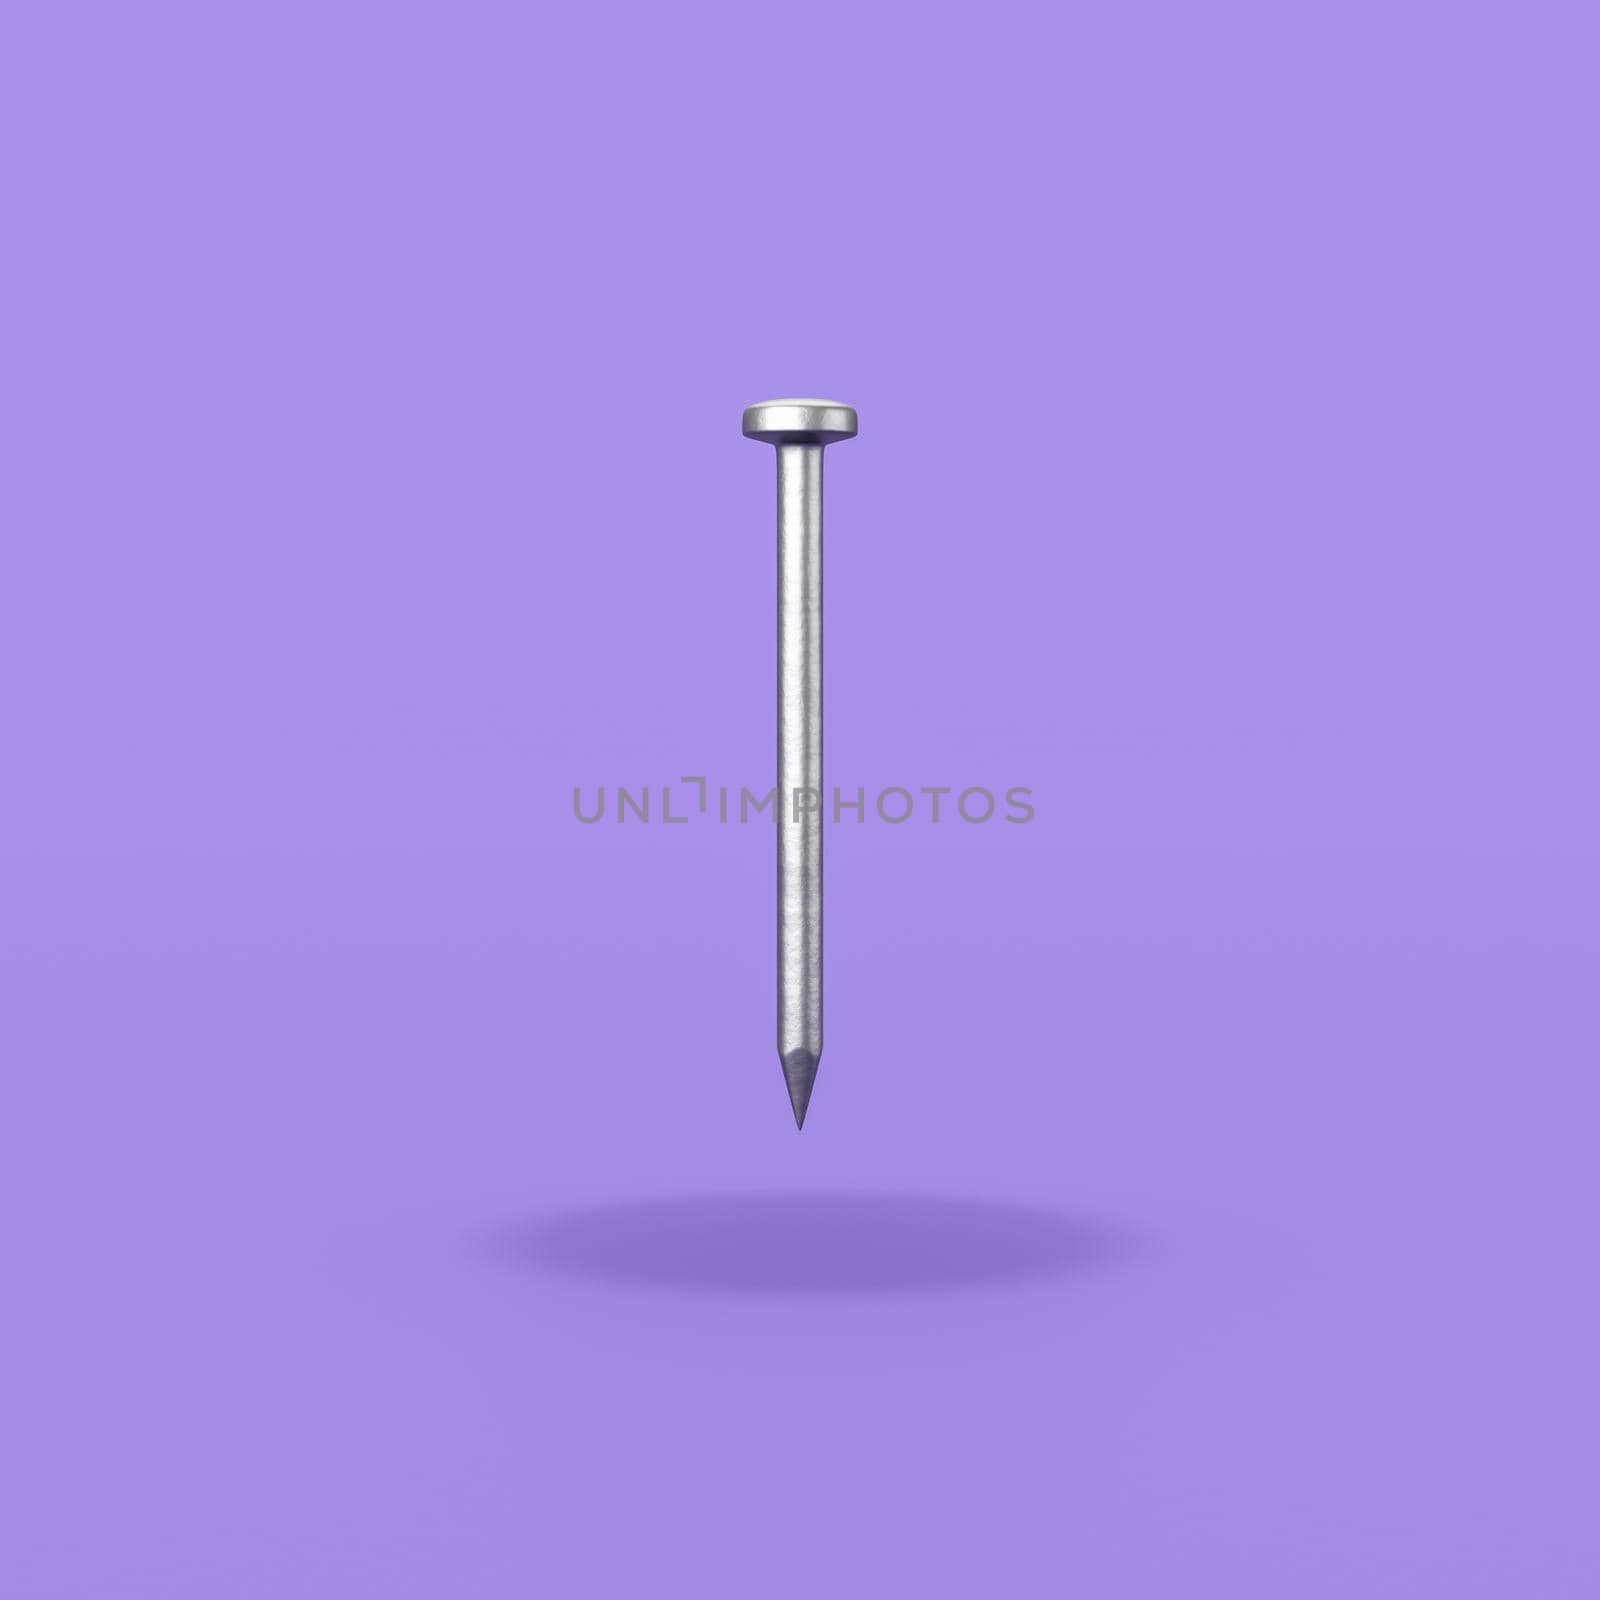 One Nail Isolated on Flat Purple Background with Shadow 3D Illustration